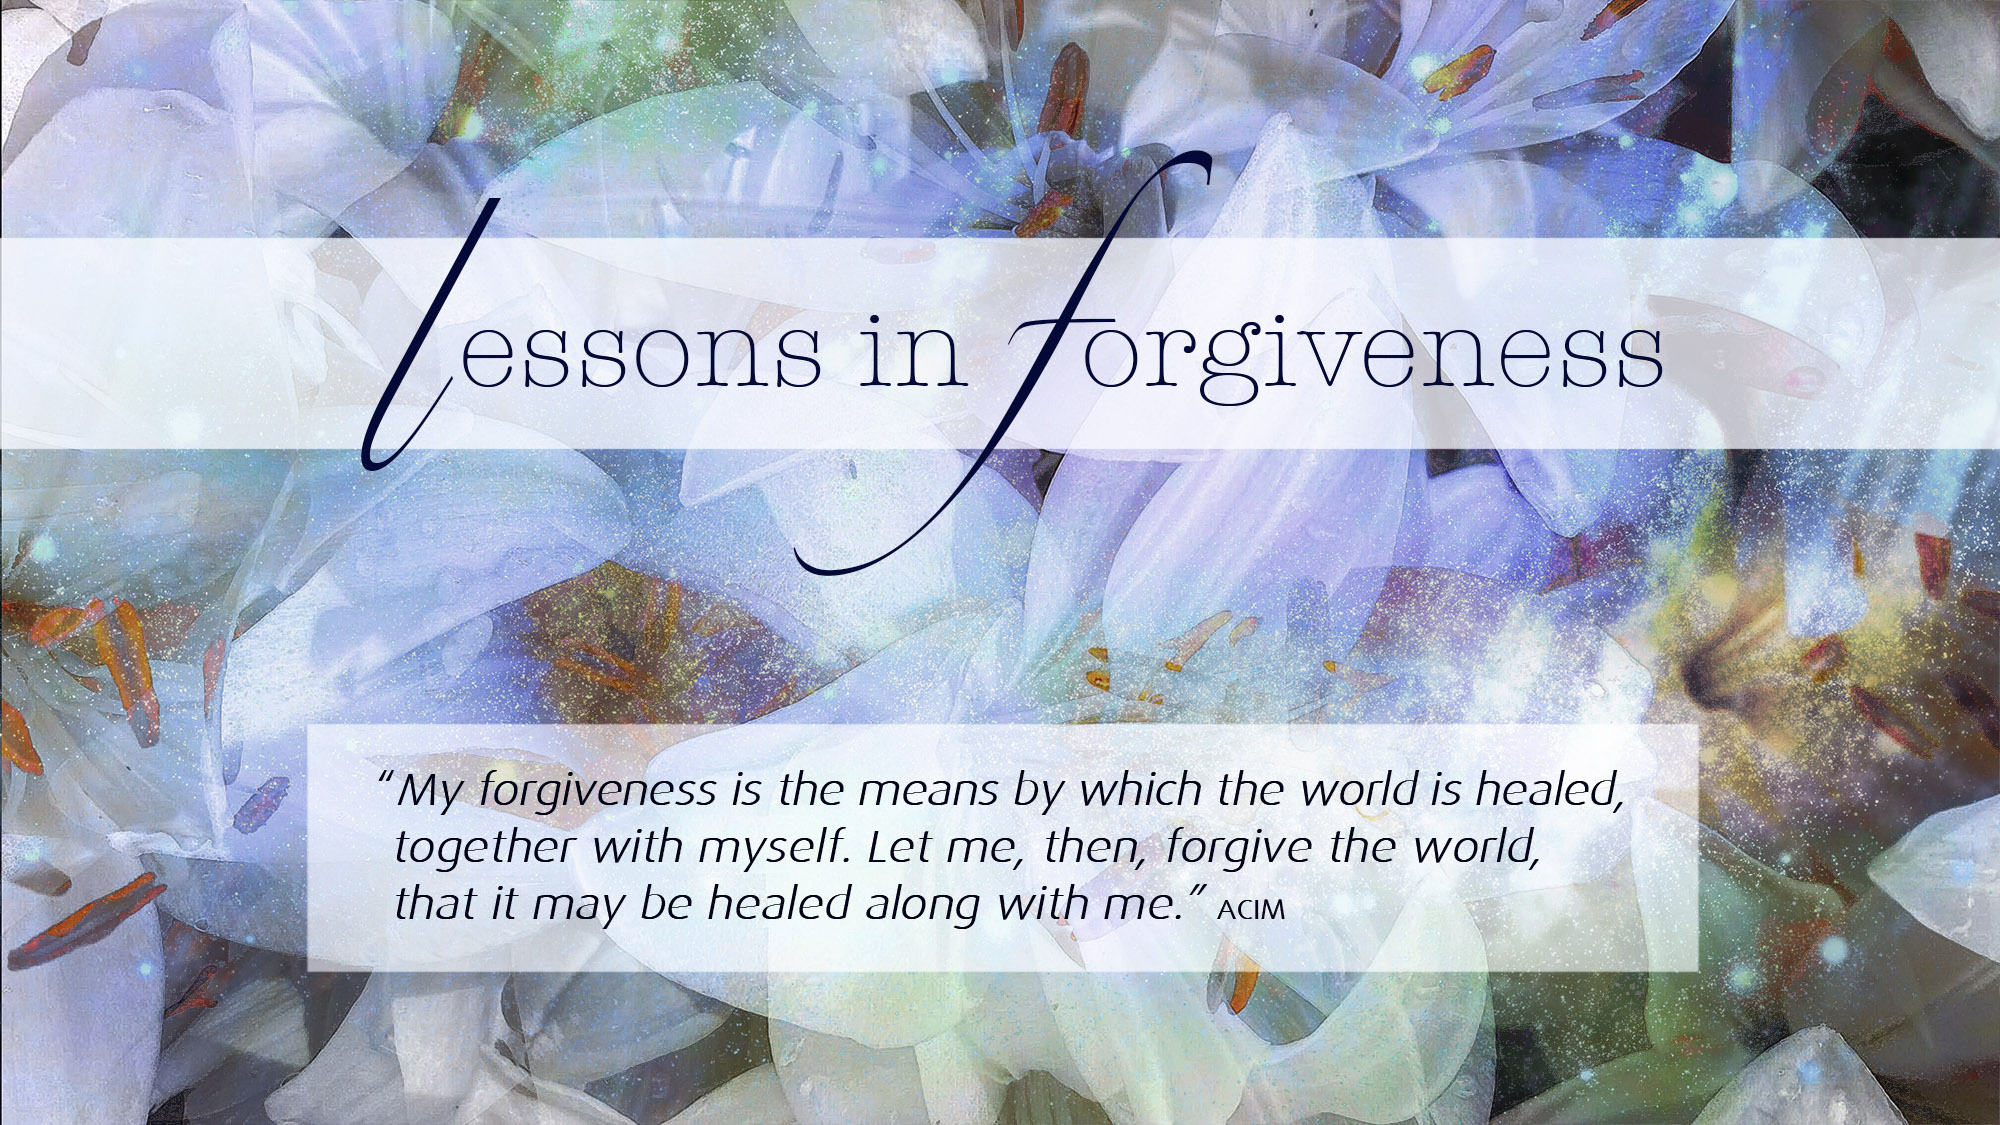 My forgiveness is the means by which the world is healed, together with myself. 5 Let me, then, forgive the world, that it may be healed along with me.